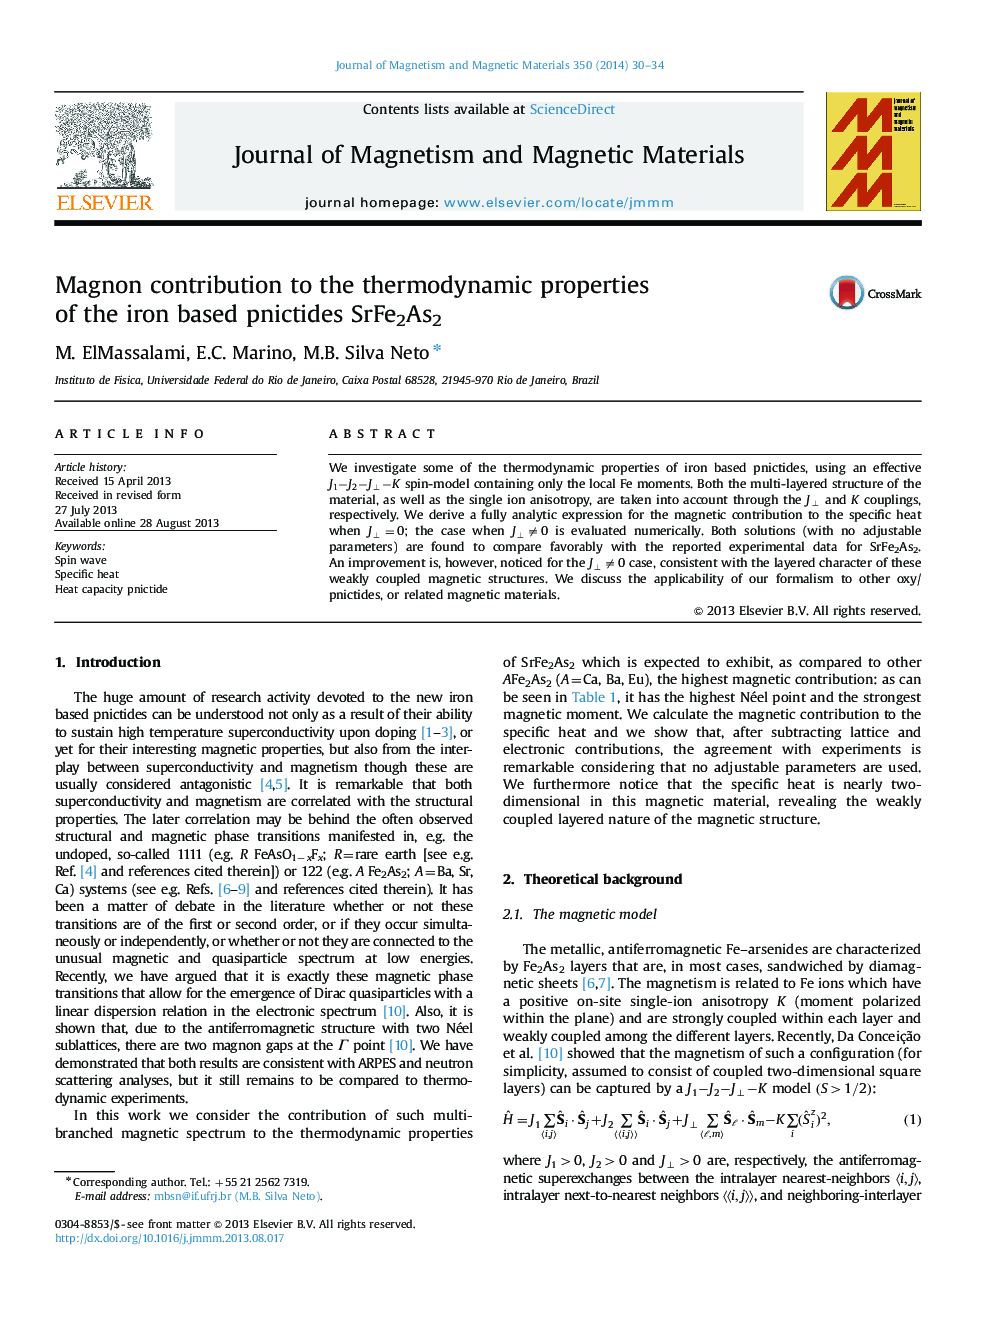 Magnon contribution to the thermodynamic properties of the iron based pnictides SrFe2As2